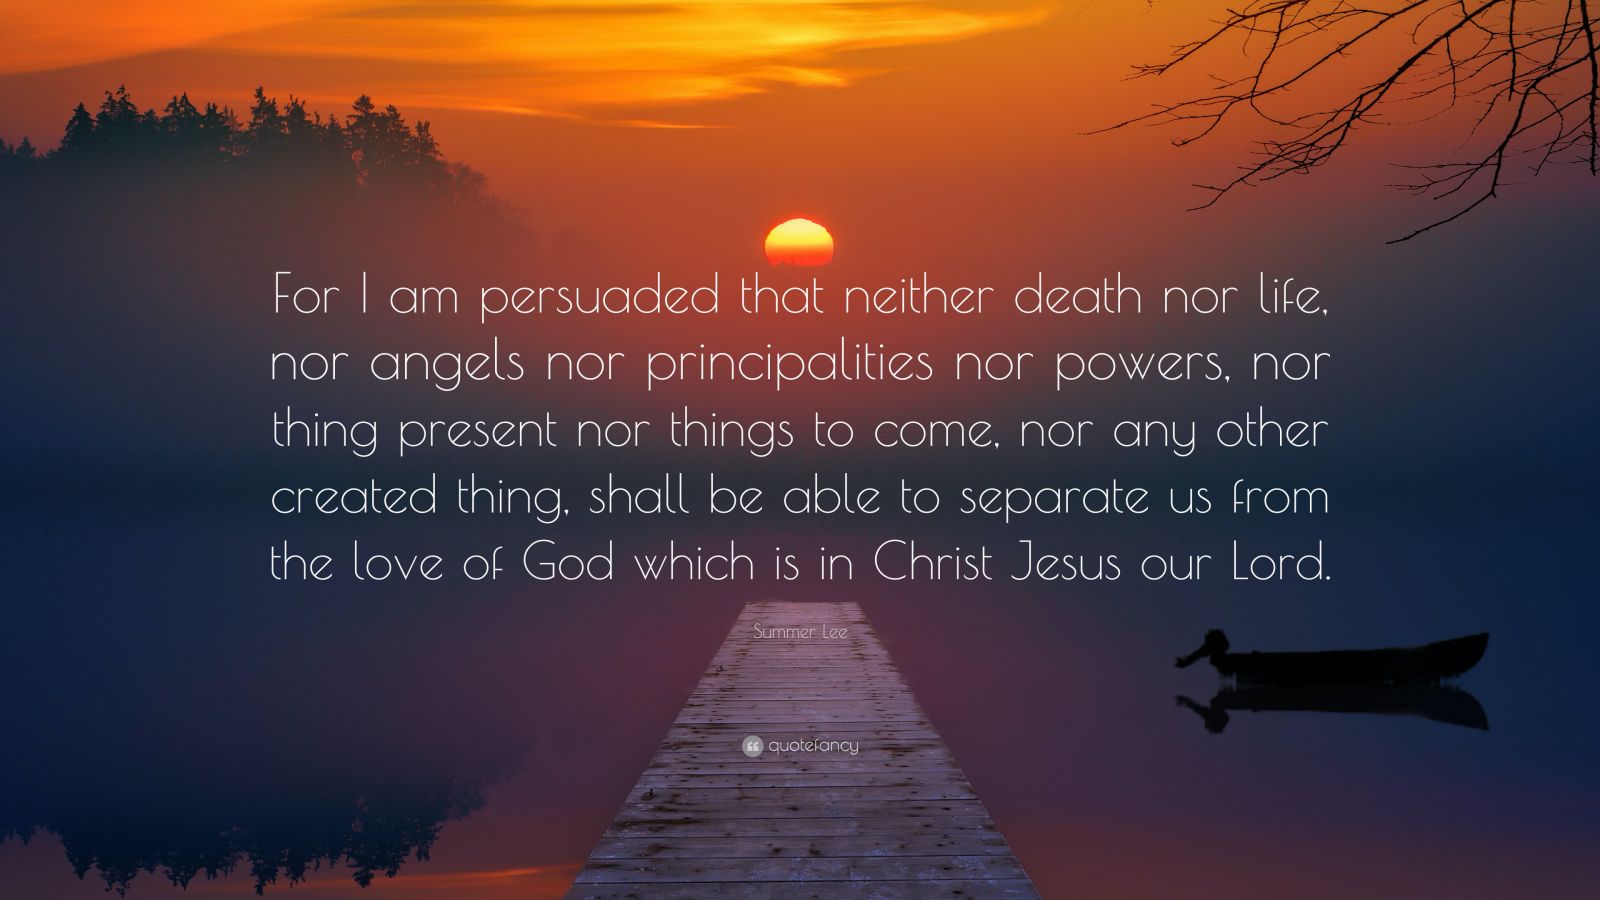 Summer Lee Quote: “For I am persuaded that neither death nor life